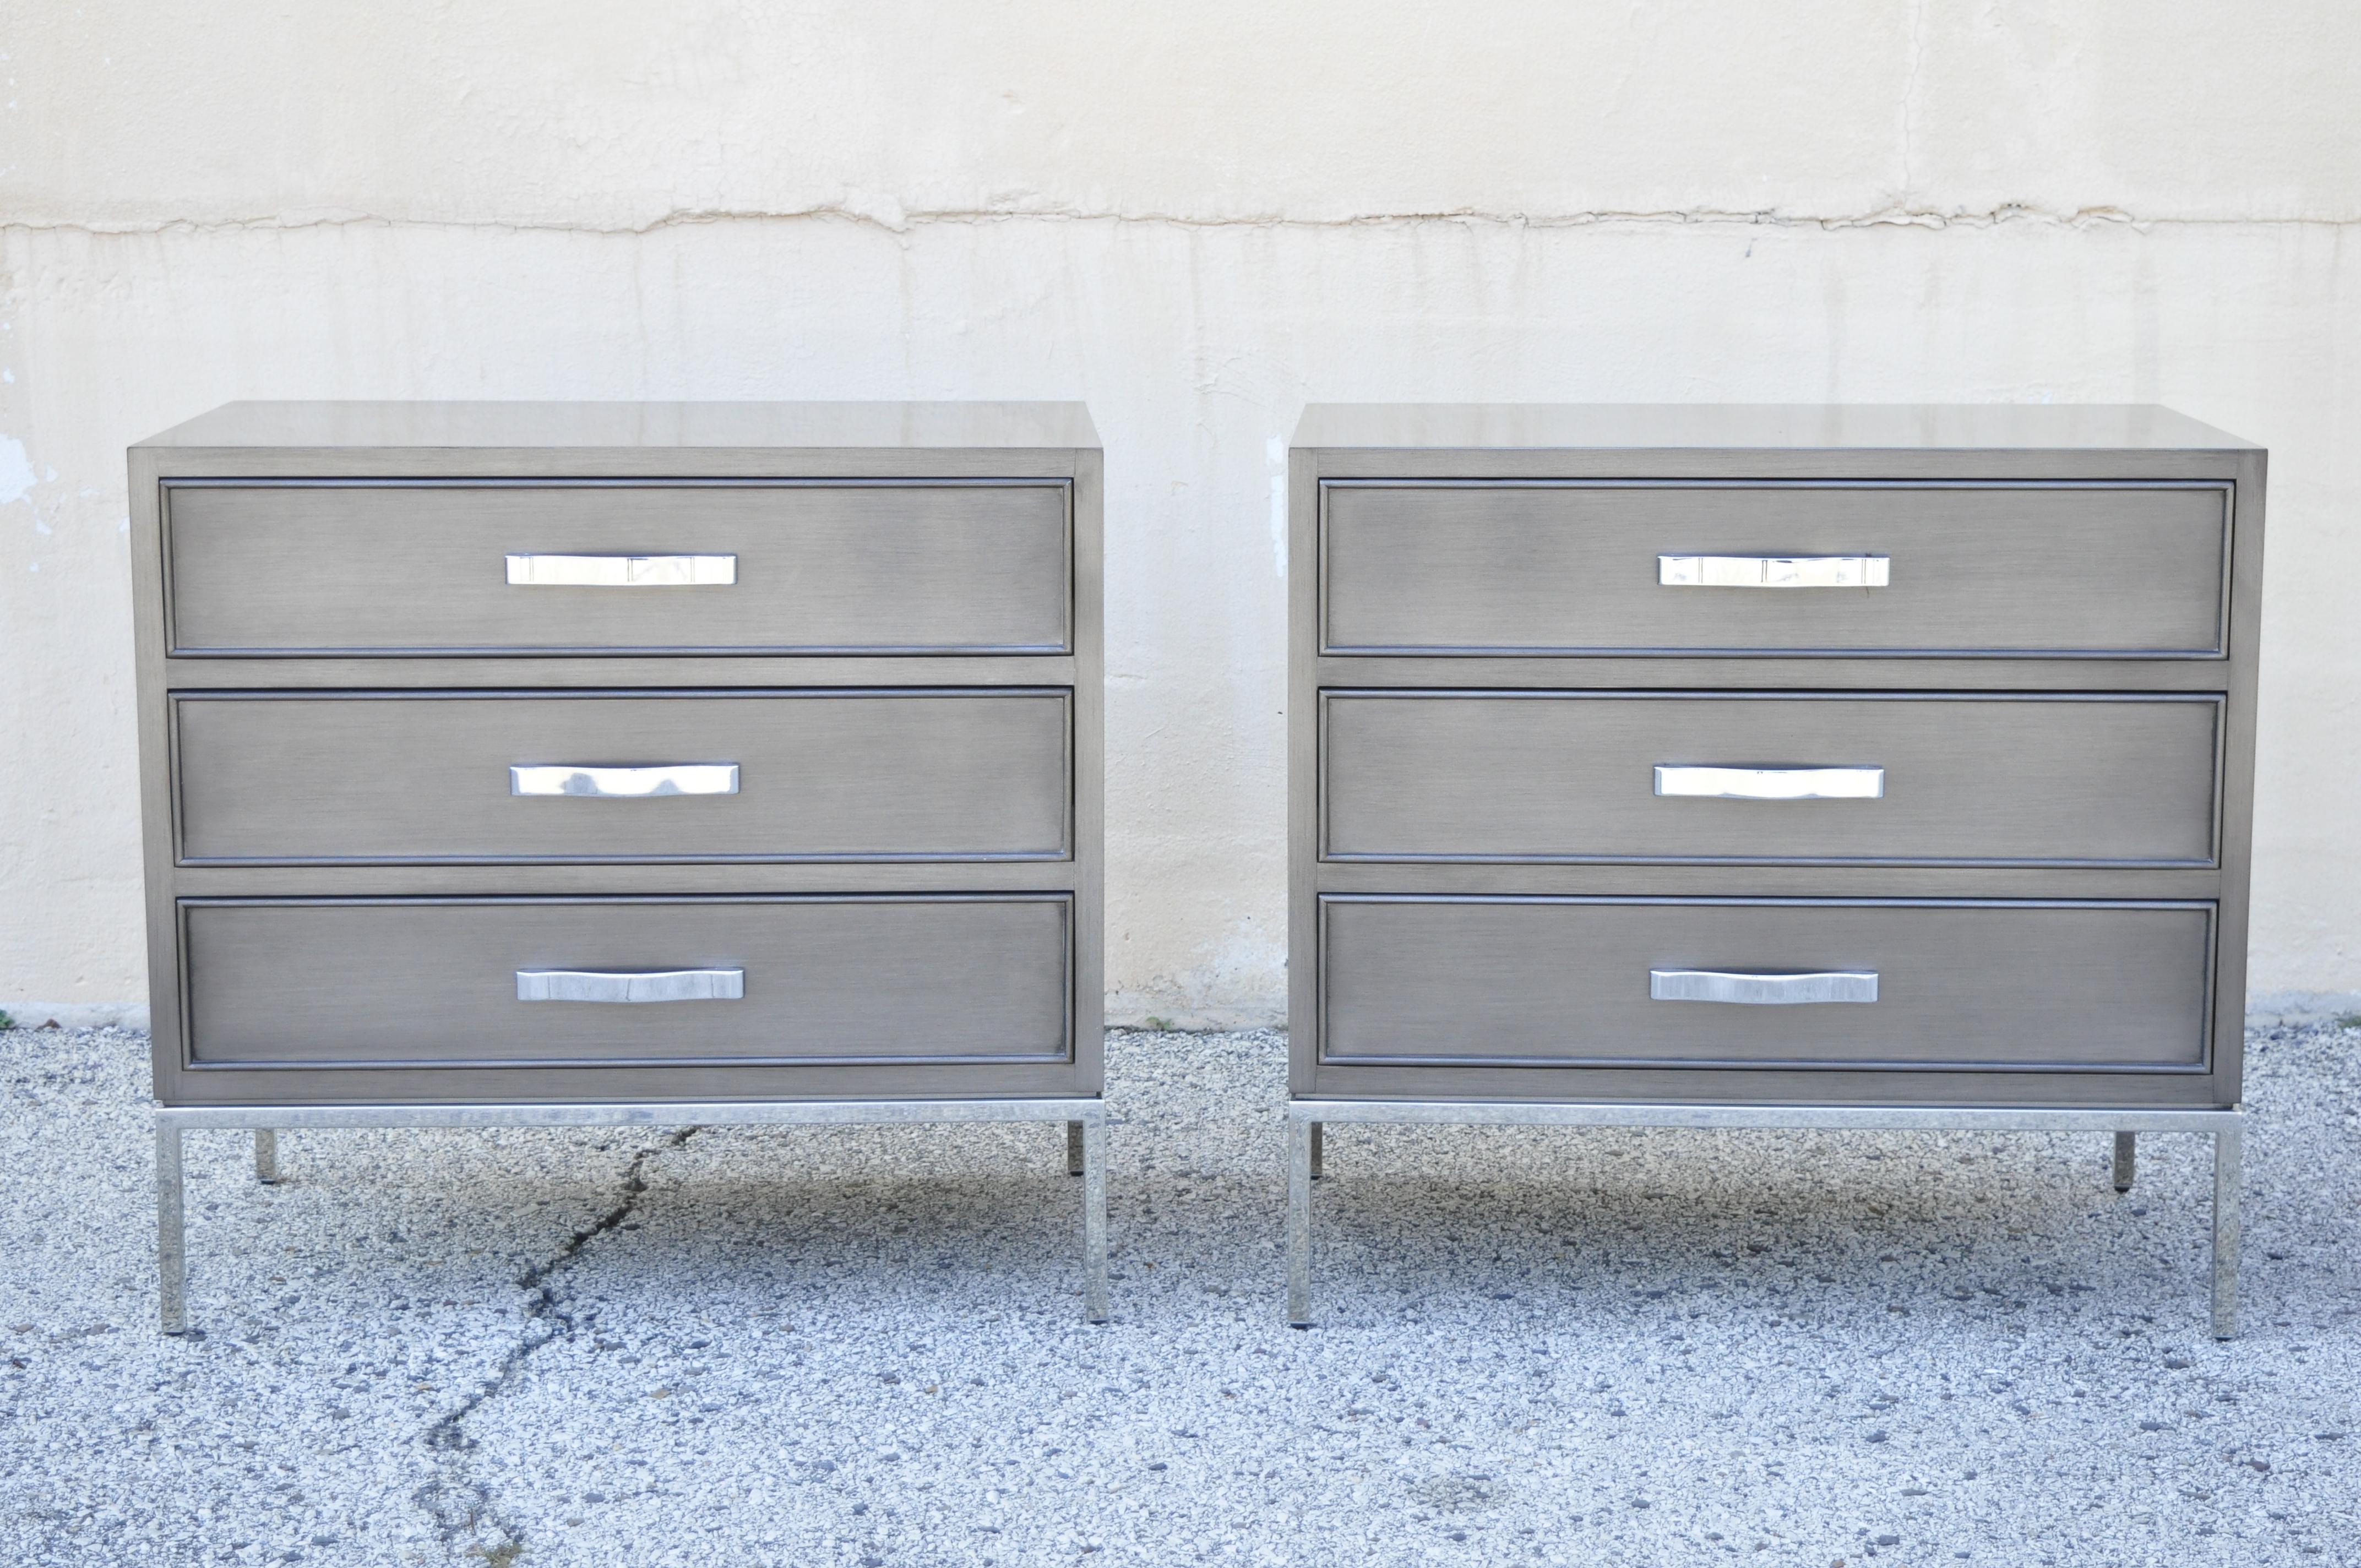 Swaim Furniture grant gray lacquer 3 drawer chest modern nightstands - a Pair. Item features polished chrome base and hardware, gray lacquered finish, original label, 3 drawers, clean modernist lines, quality American craftsmanship. Retail price